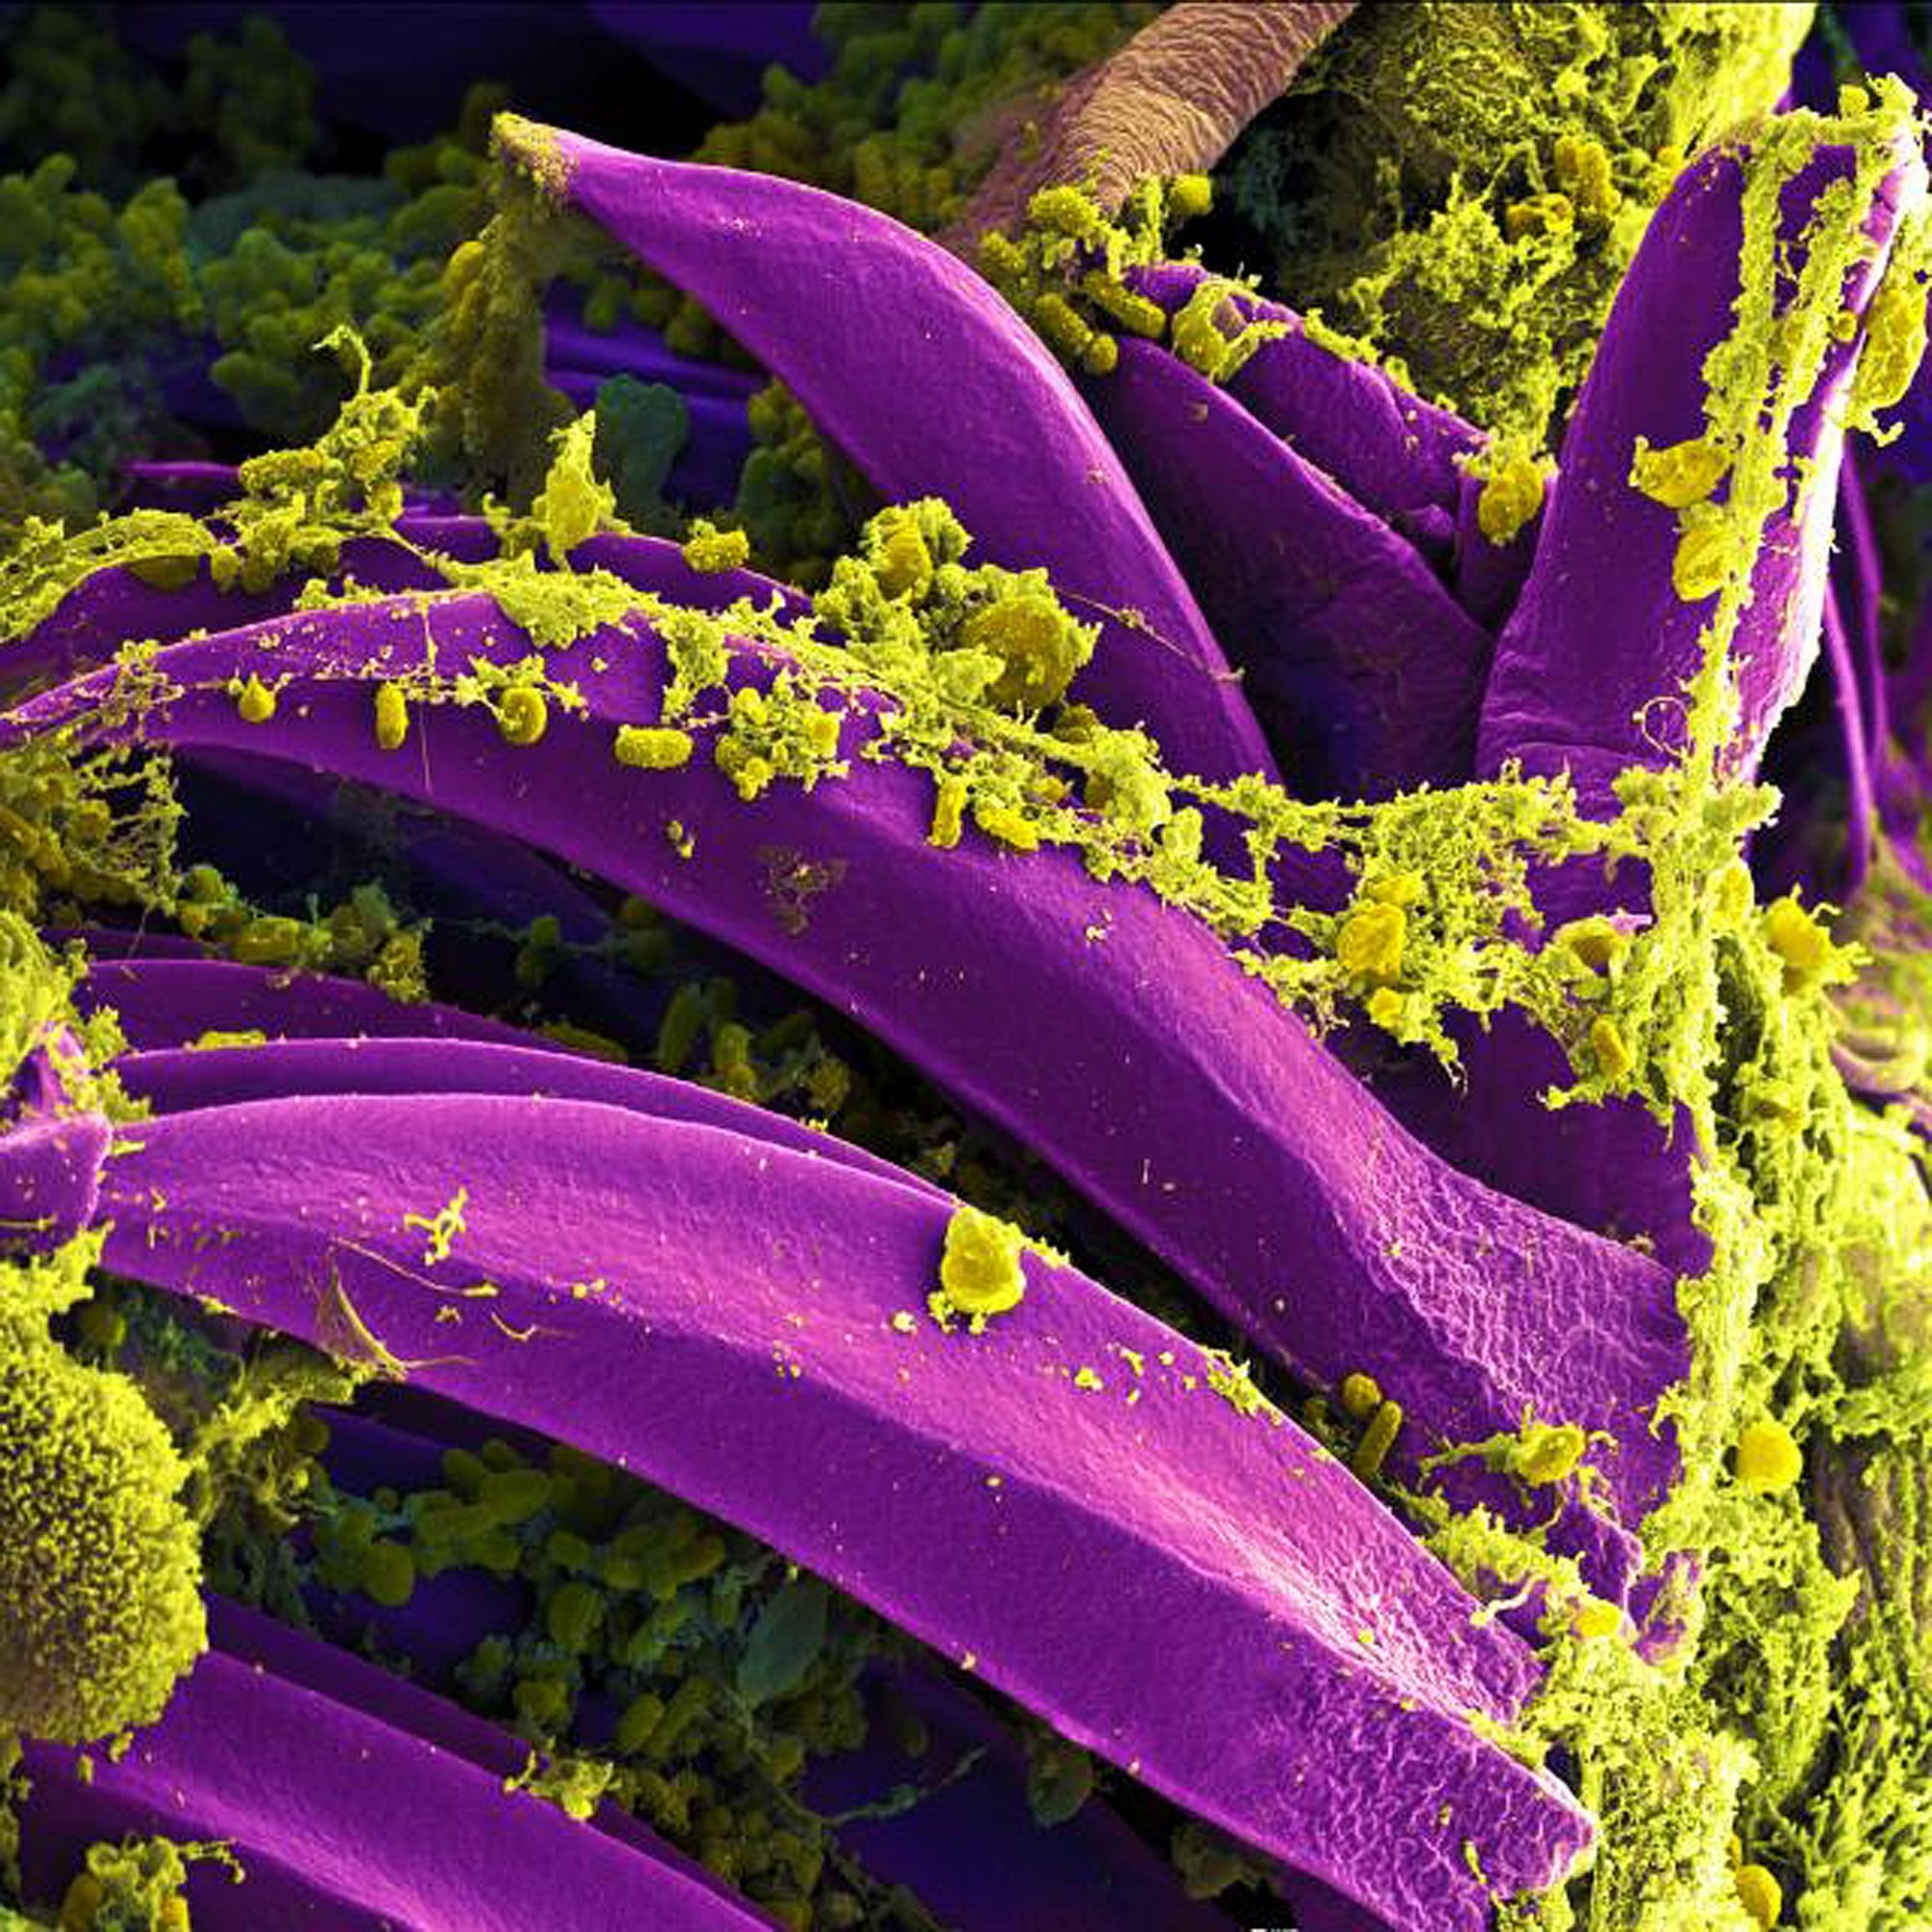 Purple-colored Yersinia pestis bacteria, the bacteria that causes the plague, seen on the spines of a flea.

Credit: National Institute of Allergy And Infectious Diseases